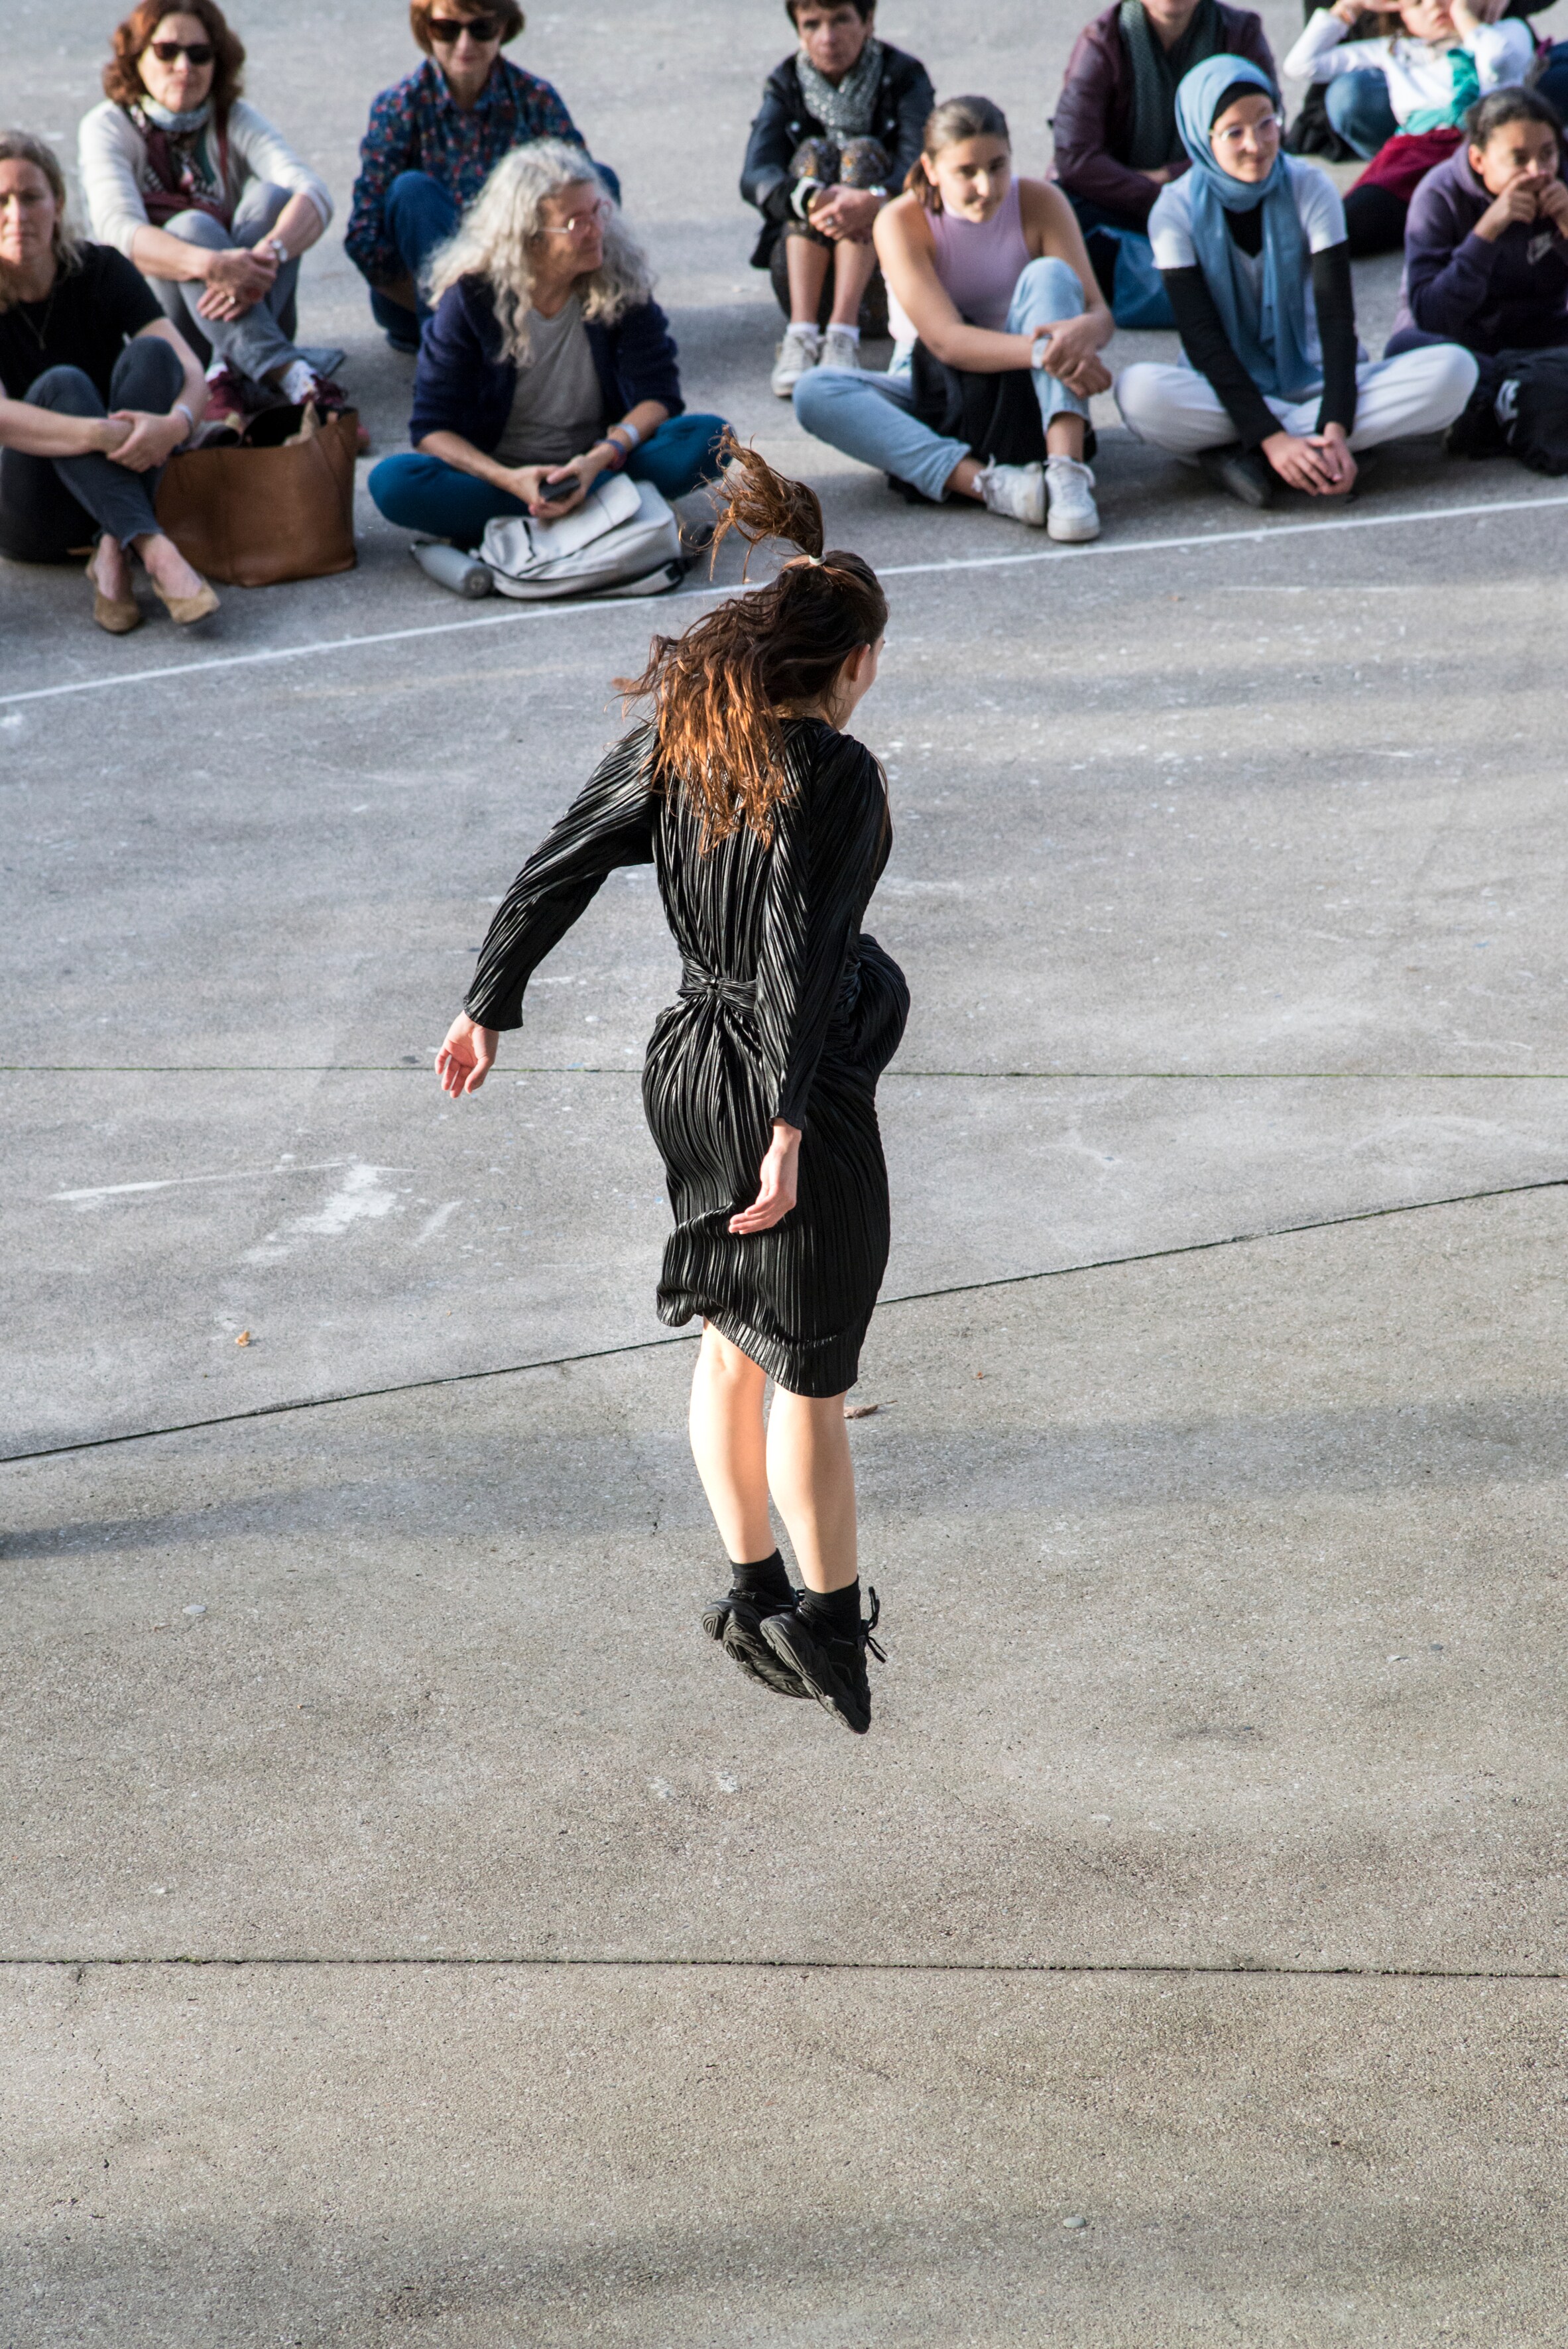 Dancer wearing a black dress, jumping on the forecourt of the Center Pompidou-Metz, facing the audience, who are sitting cross-legged